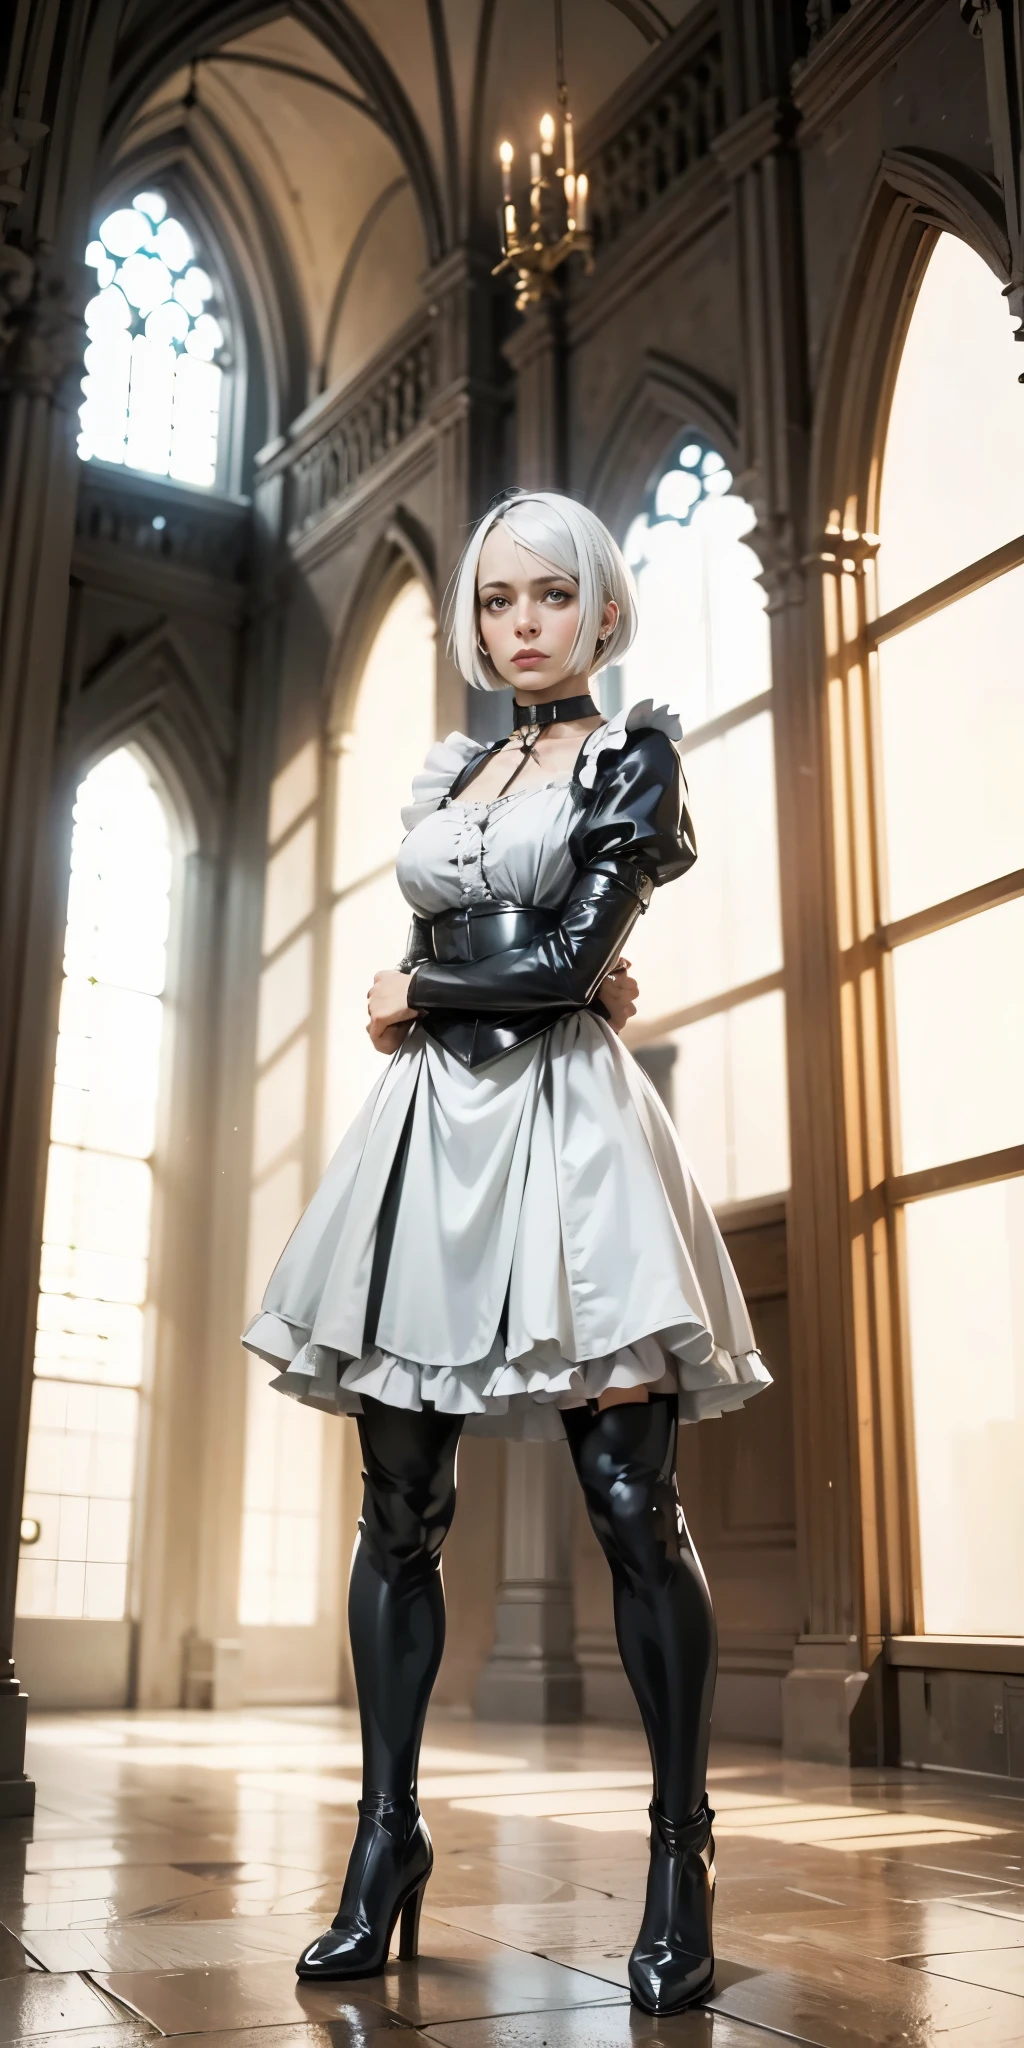 White hair, short bob hair, pinched eyes, thin legs, thin body, leather collar, maid outfit victorian, full body standing symmetrical, hands on hips, wide hips, view from below,
